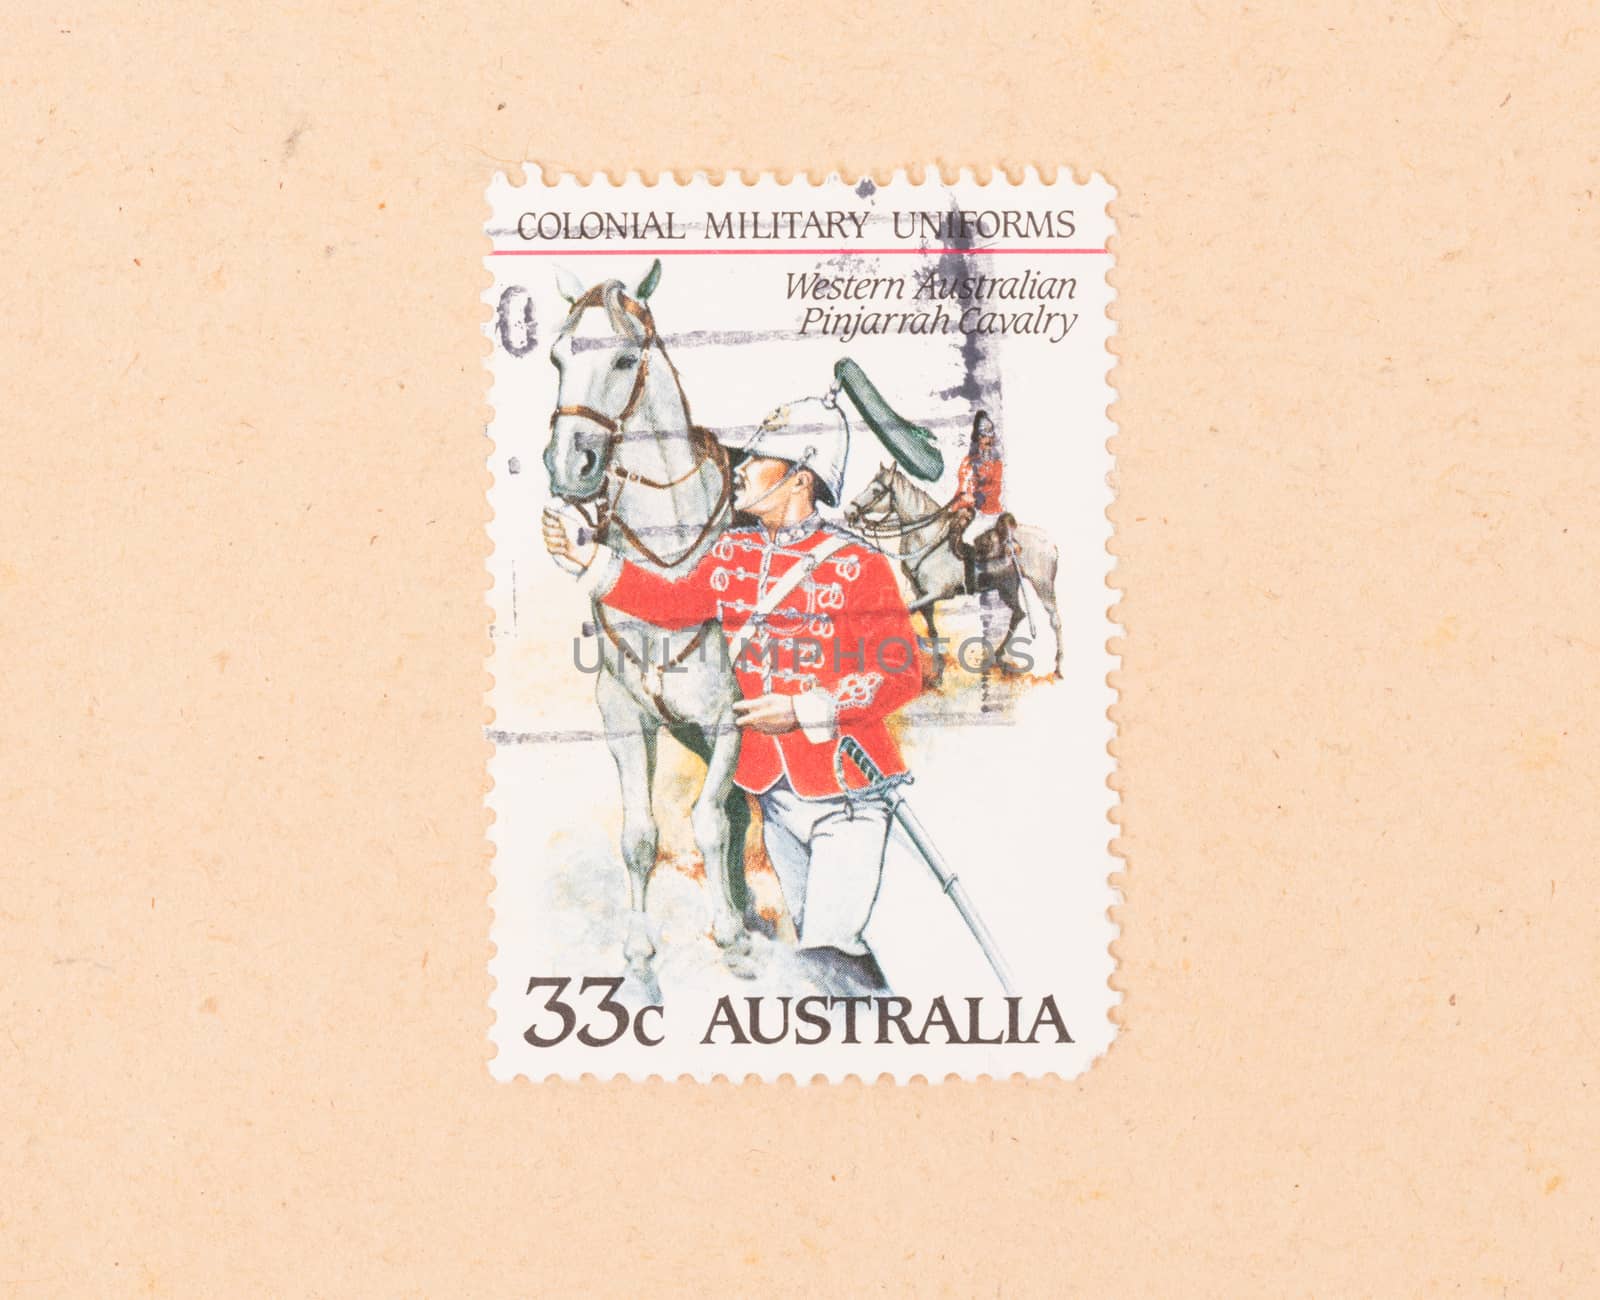 AUSTRALIA - CIRCA 1980: A stamp printed in Australia shows a mil by michaklootwijk